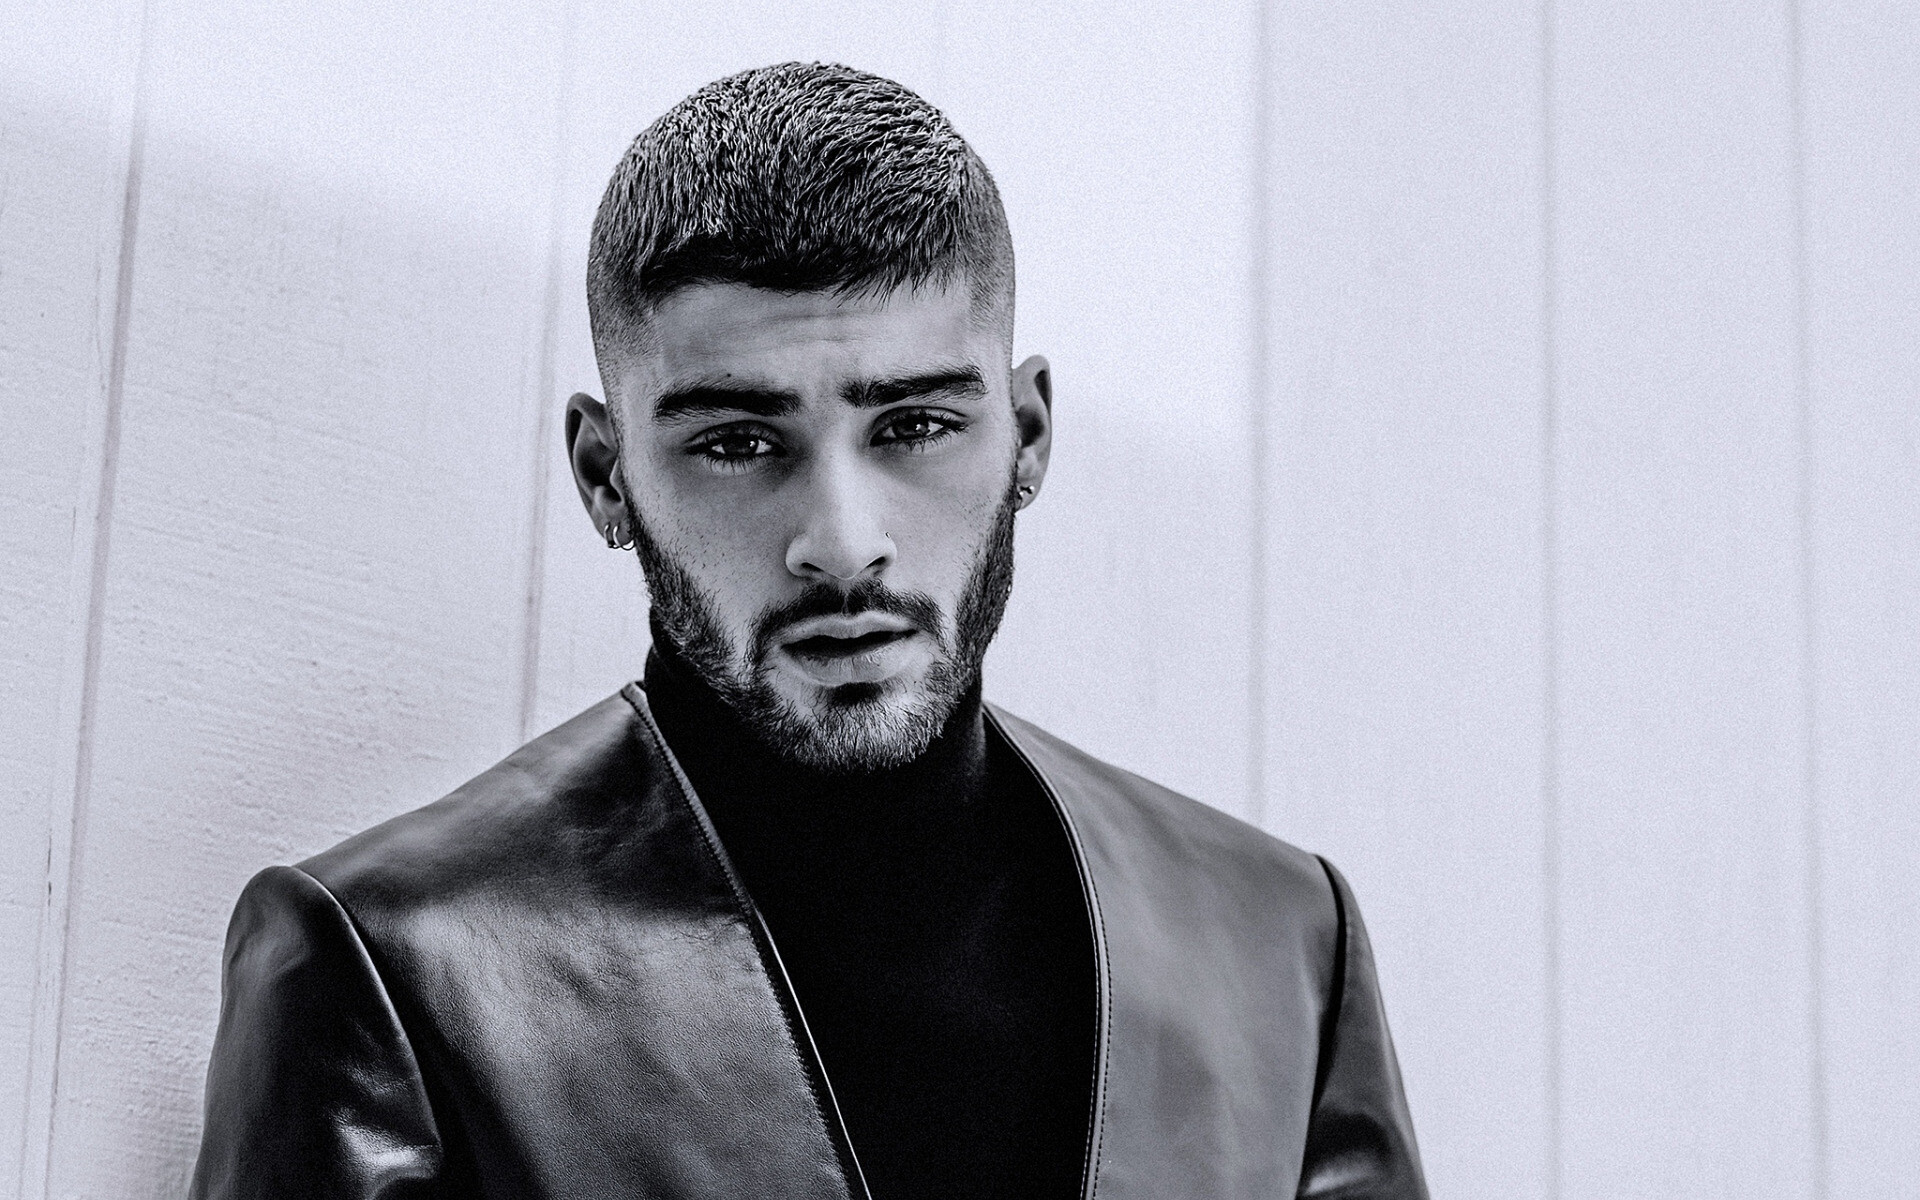 Zayn Malik: Nobody Is Listening was supported by the singles "Better" and "Vibez". 1920x1200 HD Background.